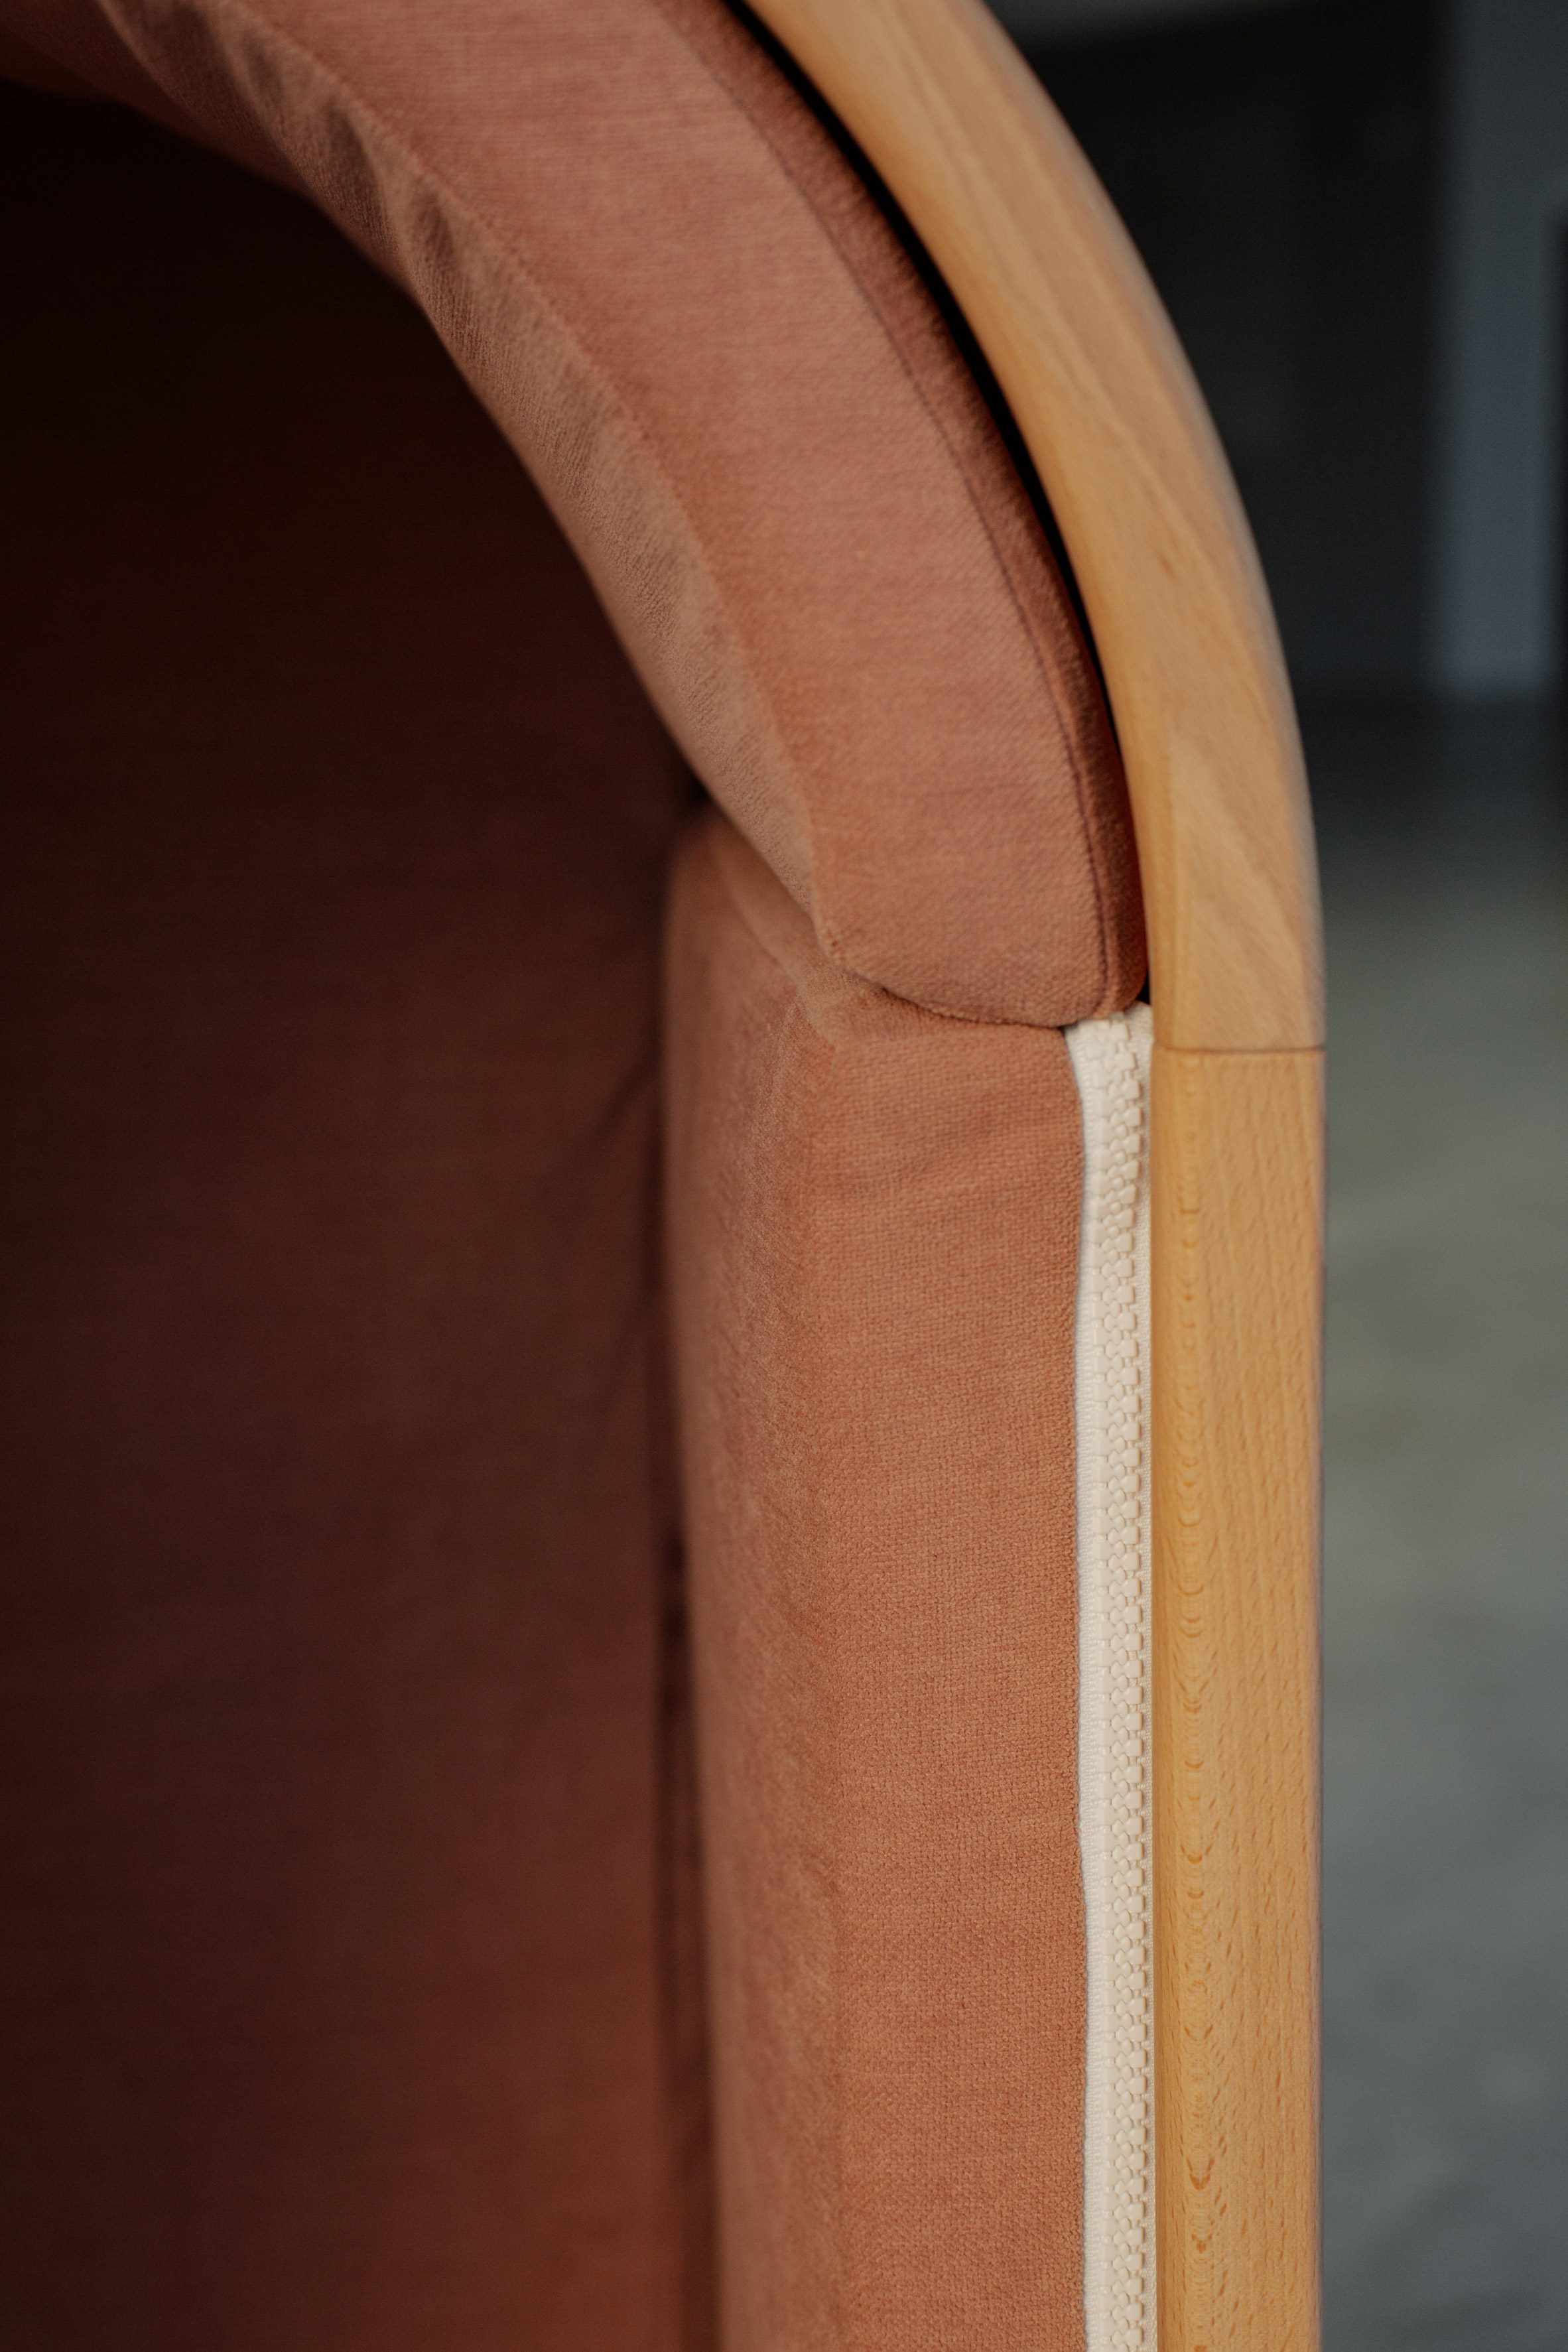 Zipper on side of wooden chair by Alexia Audrain